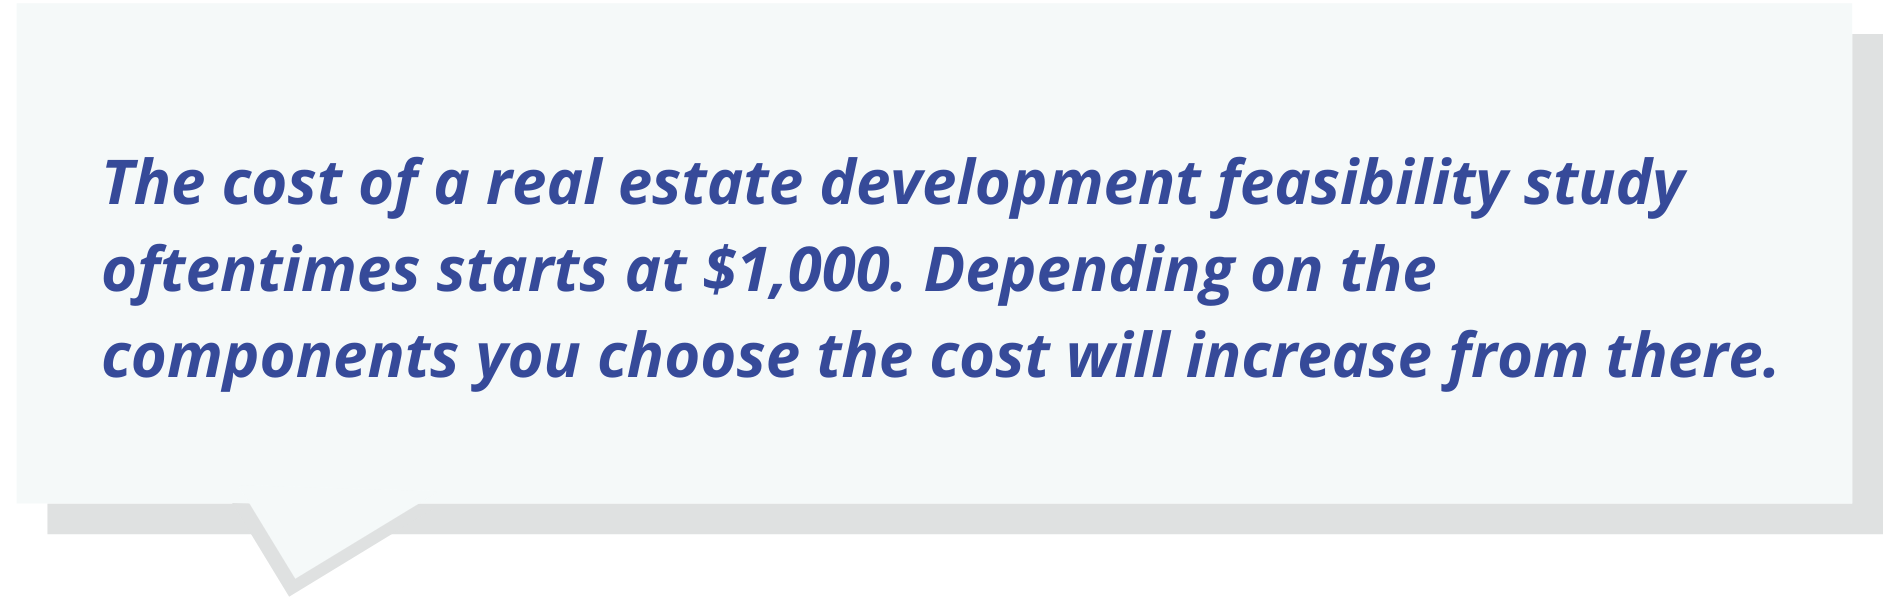 The cost of a real estate development feasibility study oftentimes starts at $1,000. Depending on the components you choose the cost will increase from there.